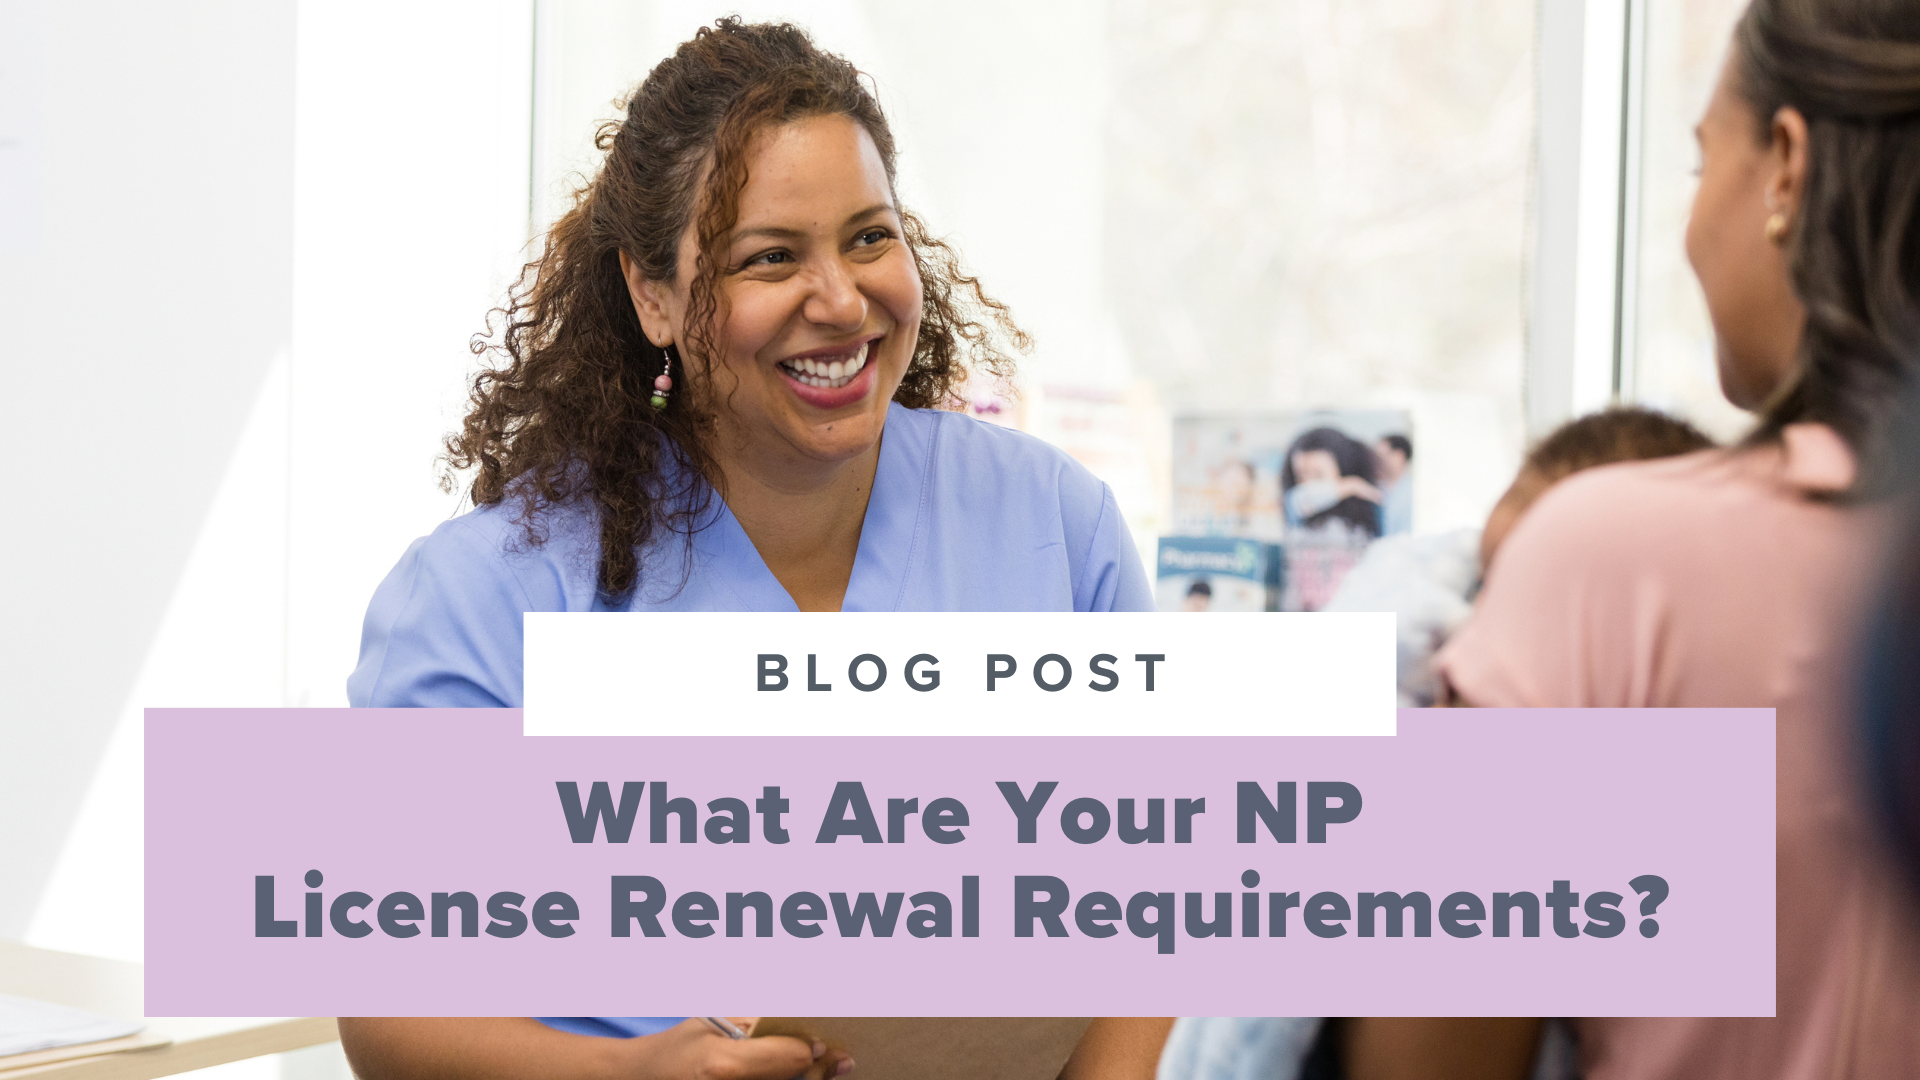 SMNP Blog - What Are Your NP License Renewal Requirements?